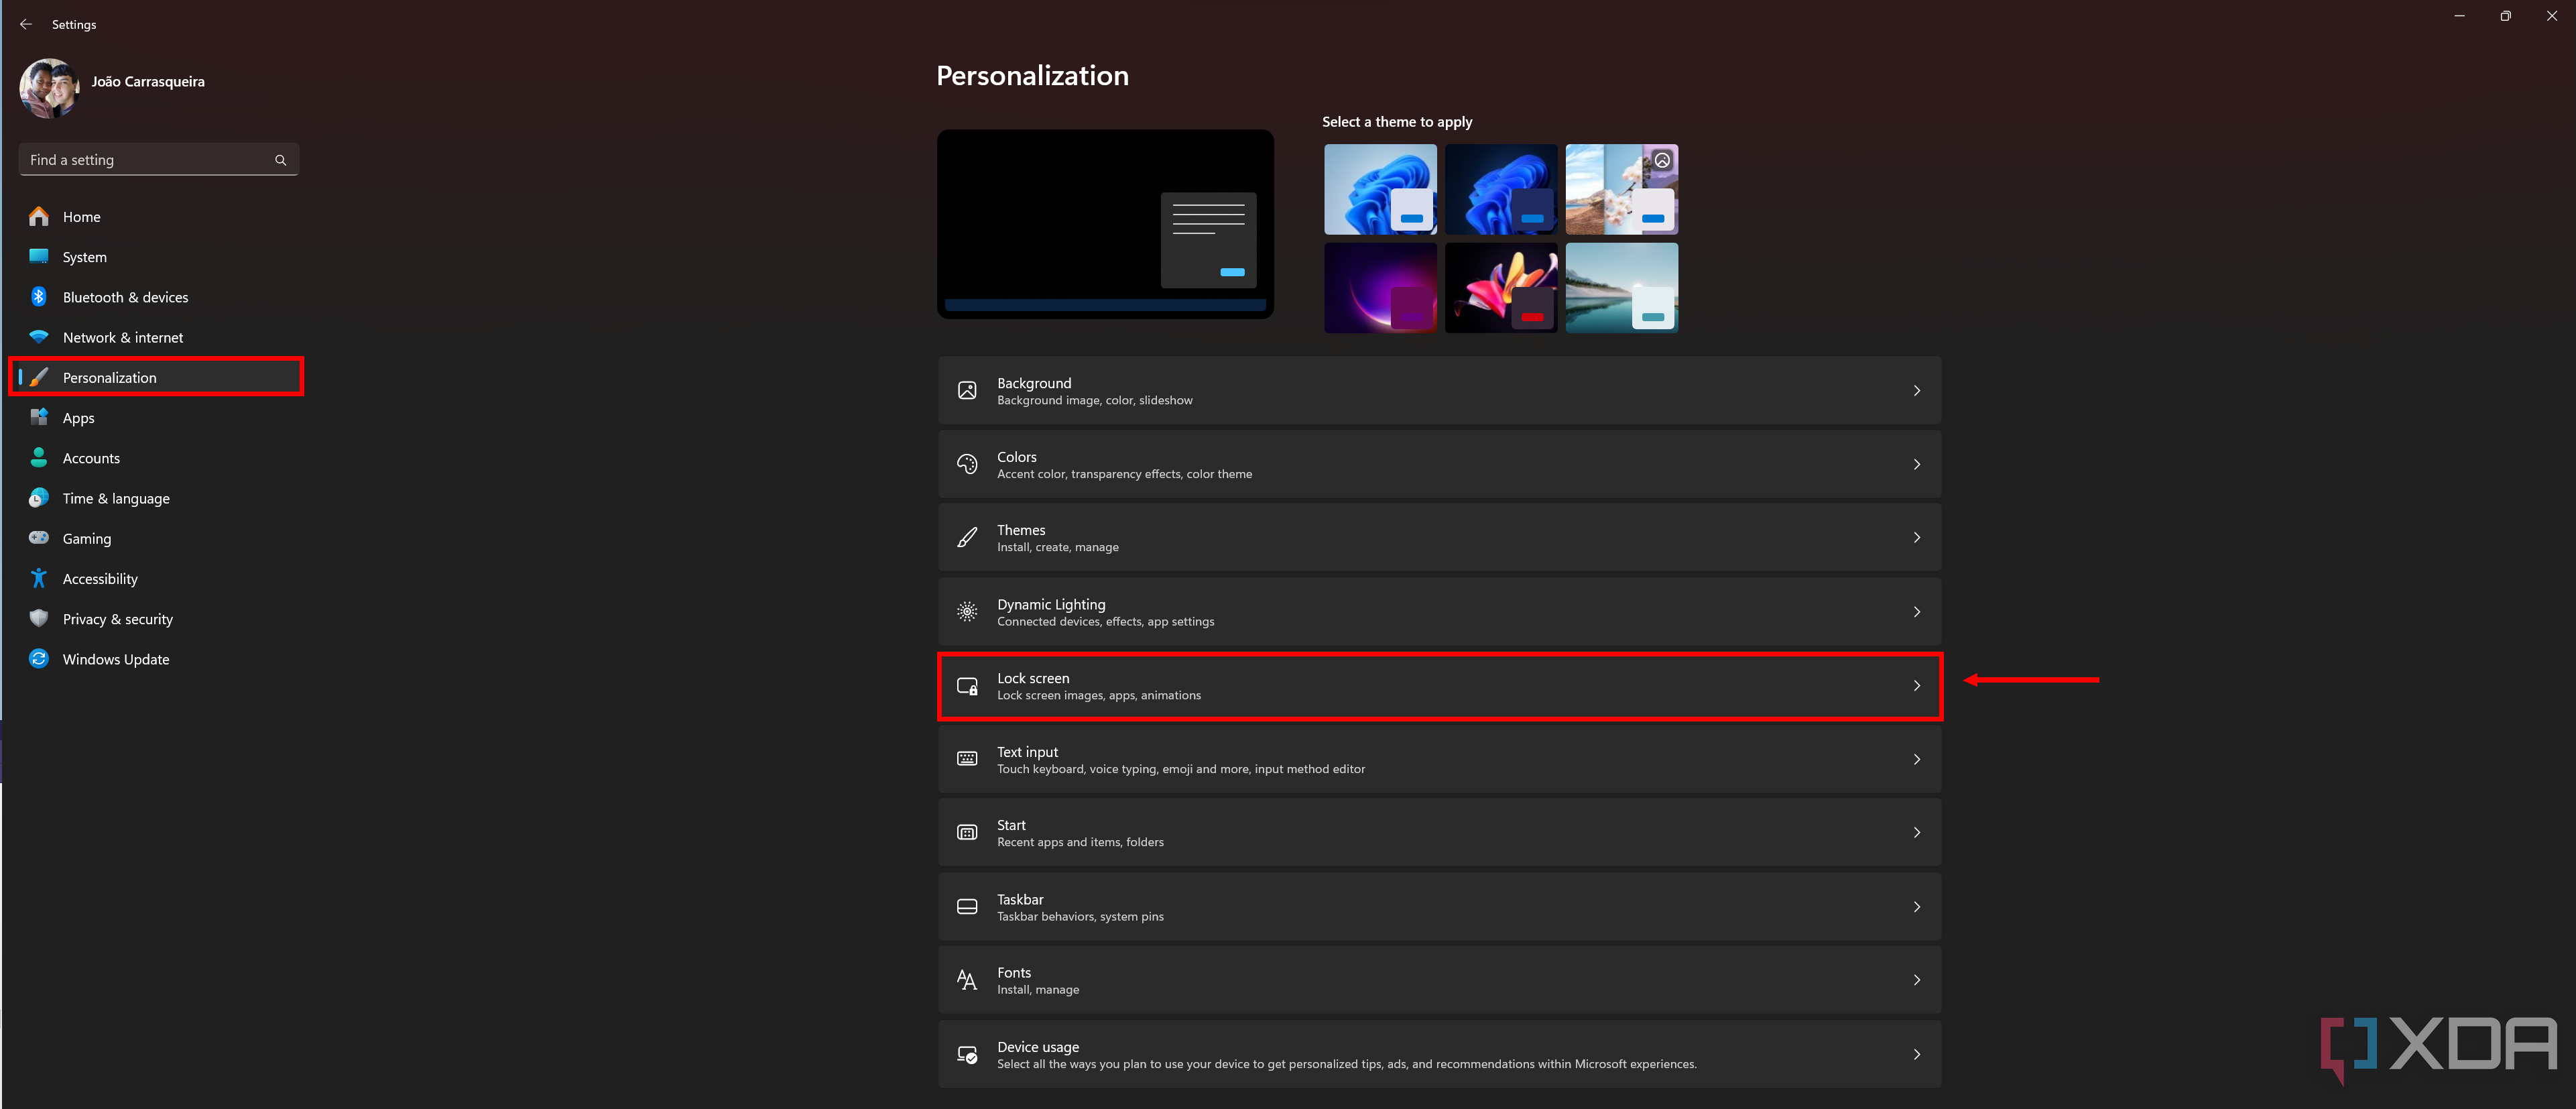 Screenshot of the Personalization section in Windows 11 Settings with the Lock screen button highlighted